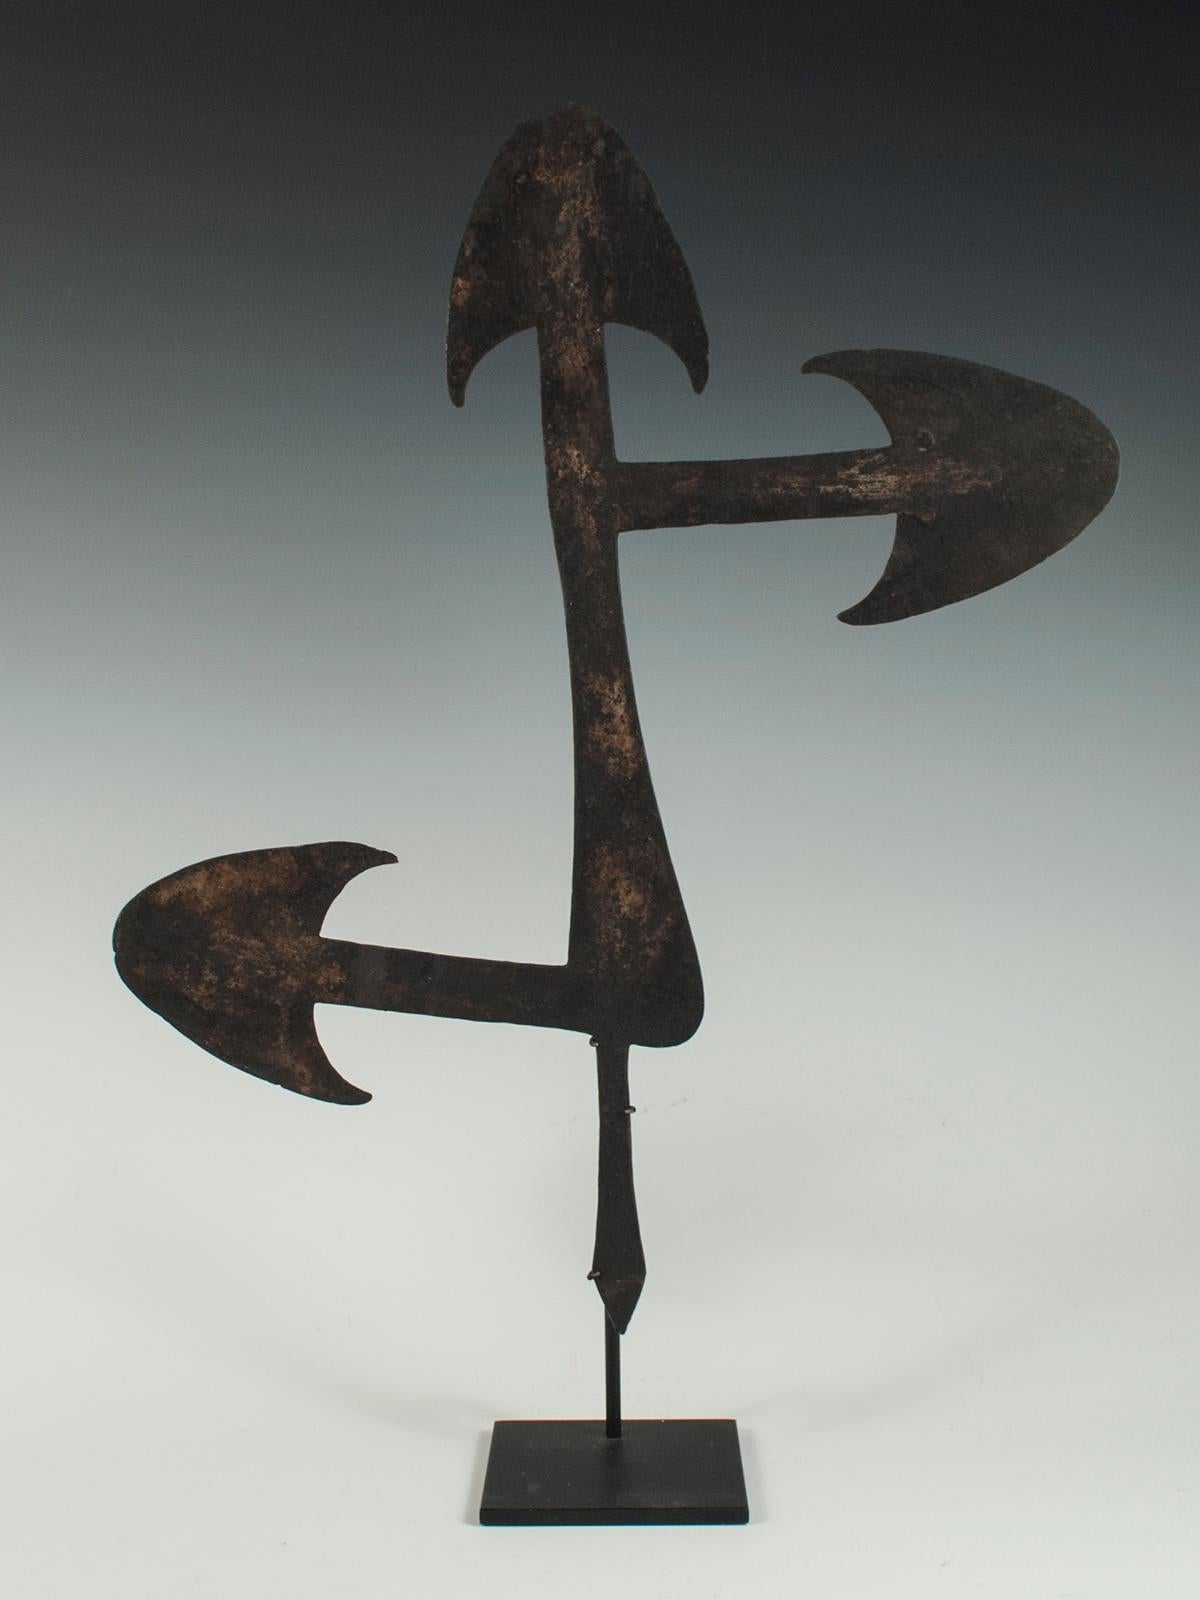 Forged Early to Mid-20th Century Tribal Iron Currency Blade, Mboum People, Cameroon